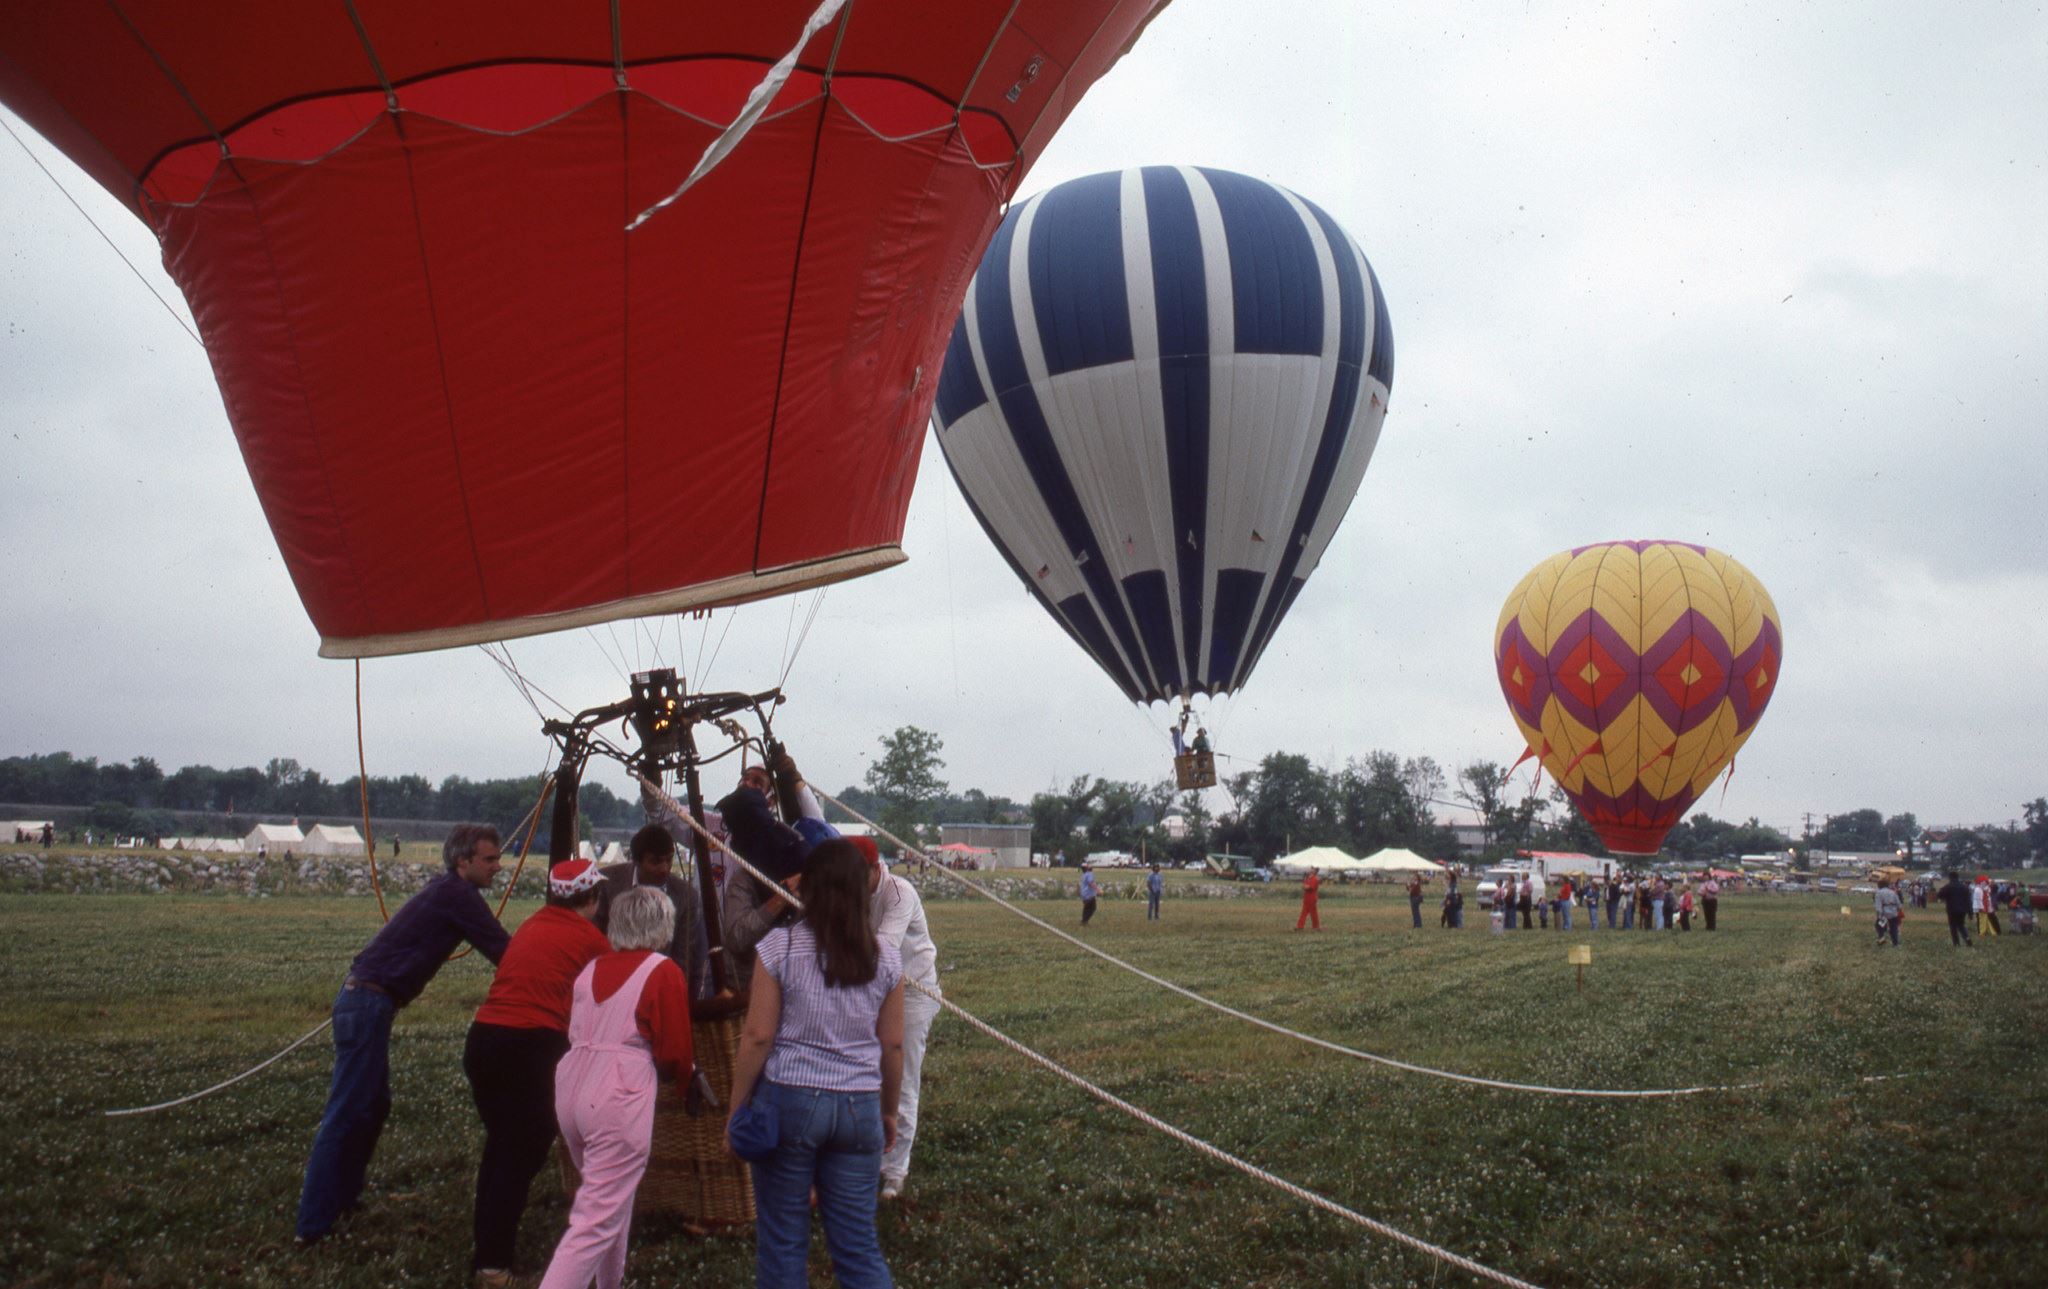 Image of 3 hot air balloons preparing for launch at the Festival of Flight